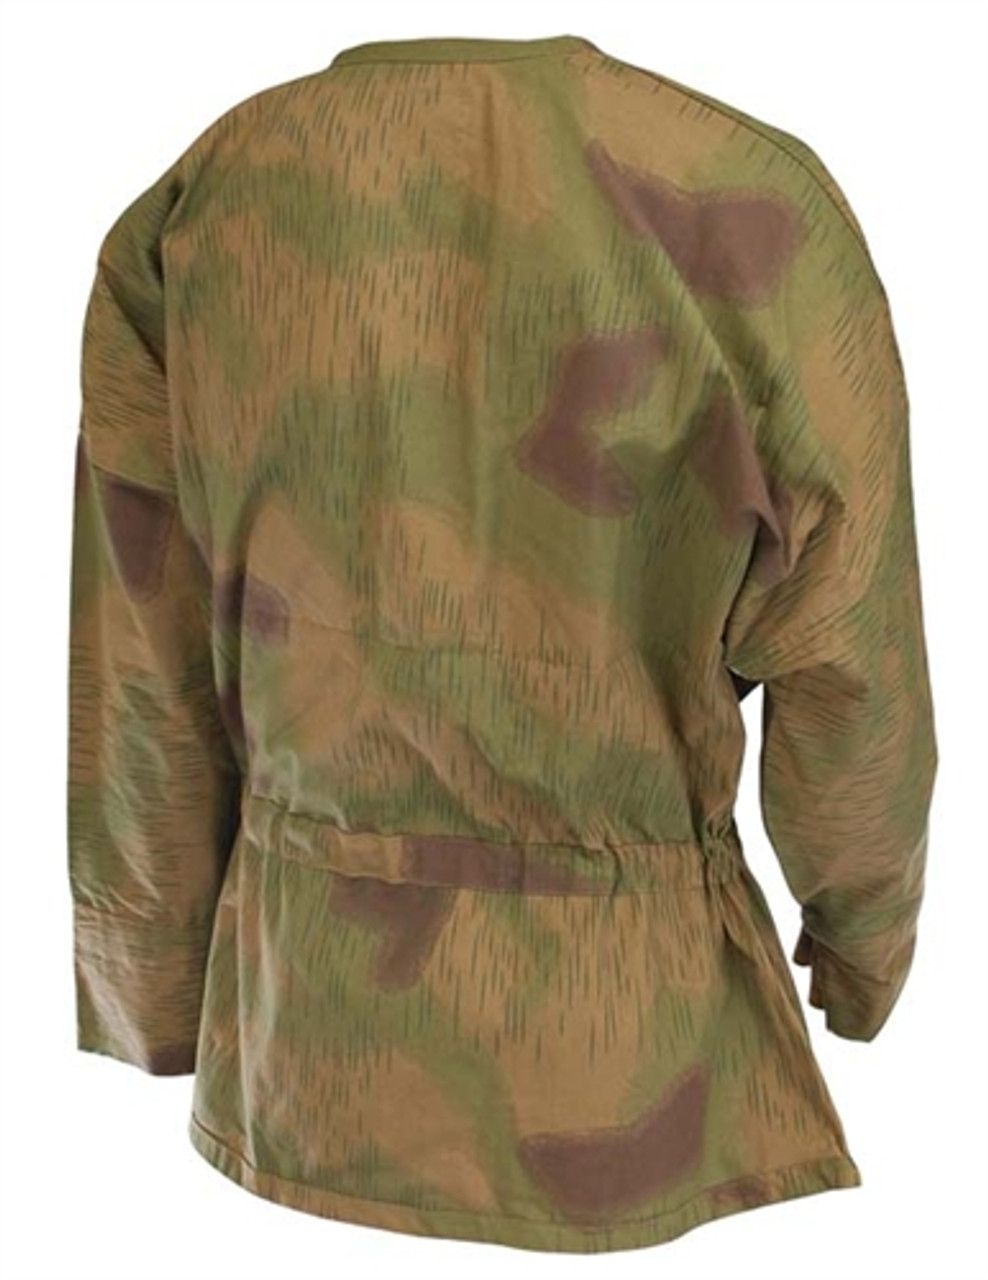 Camouflage Smock, Tan/Water Camo Material from Hessen Antique